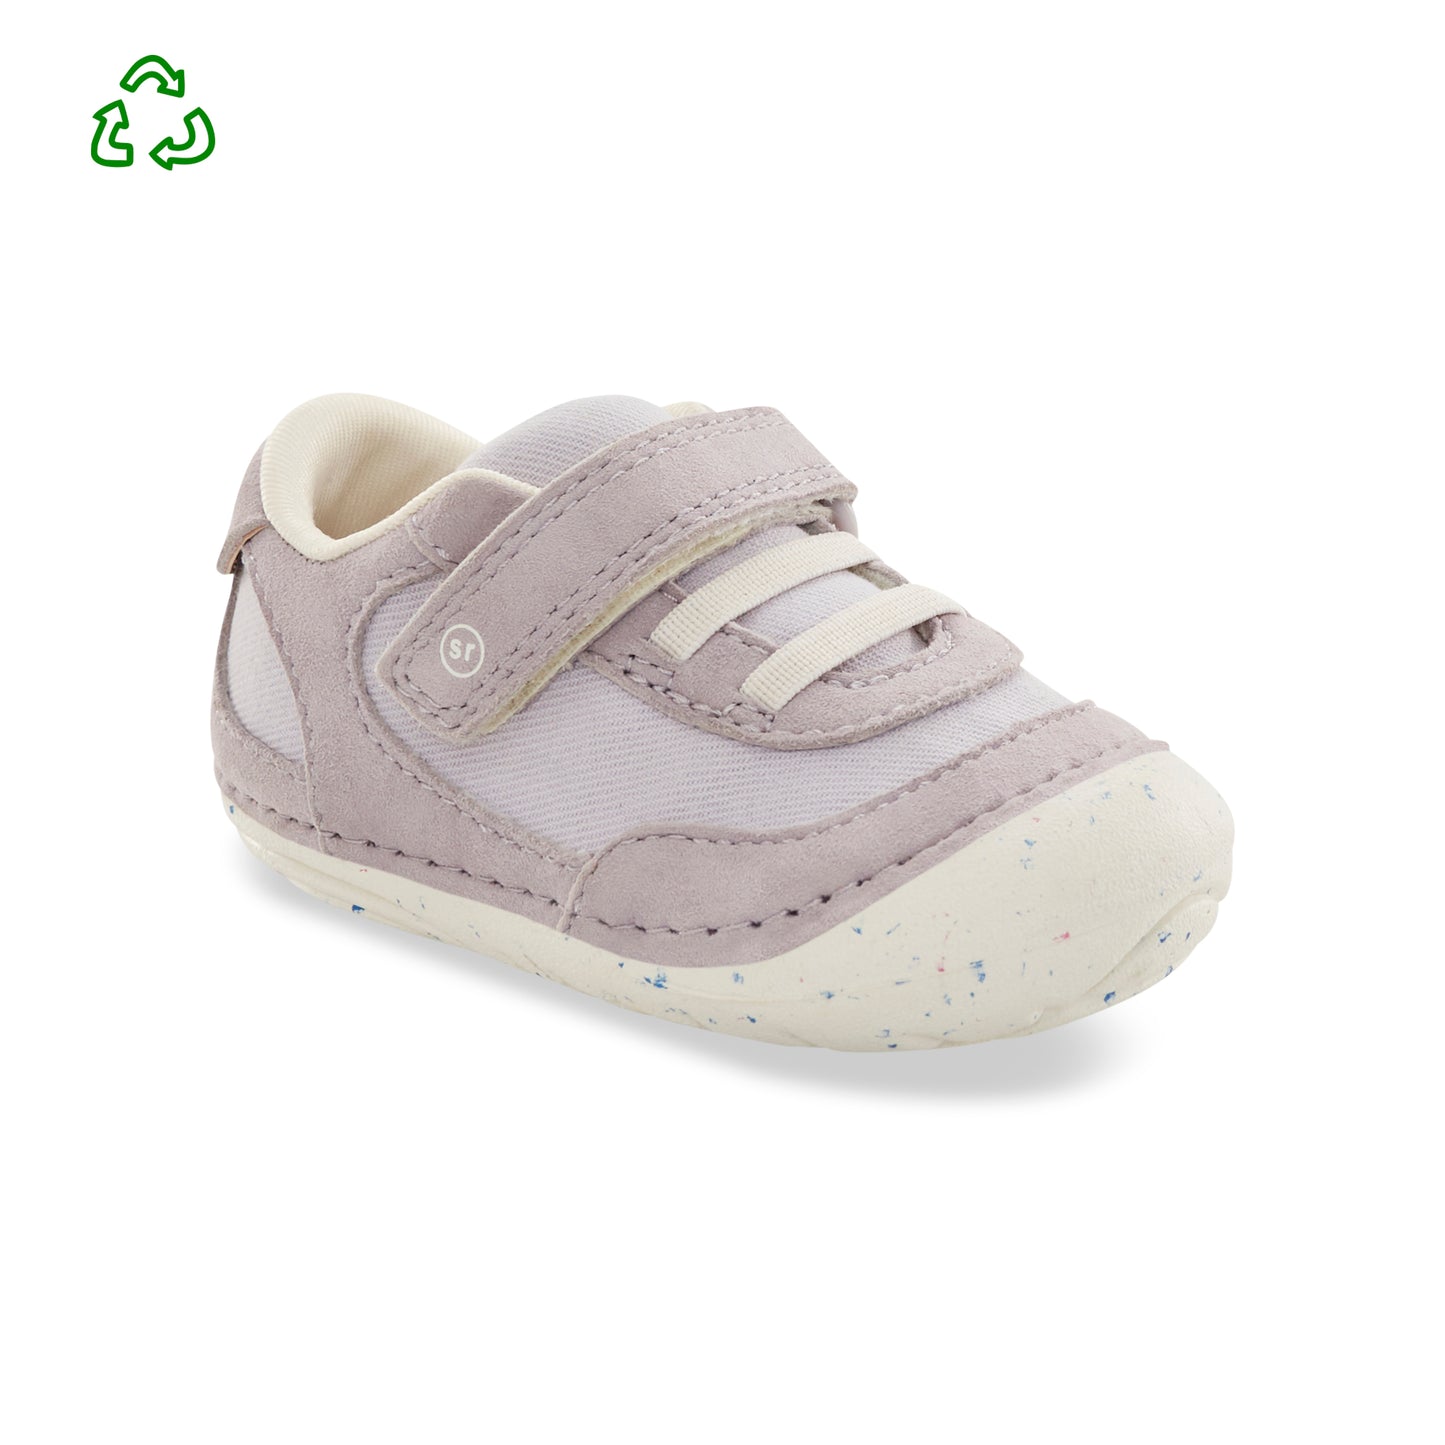 soft-motion-sprout-sneaker-littlekid-lilac__Lilac_1